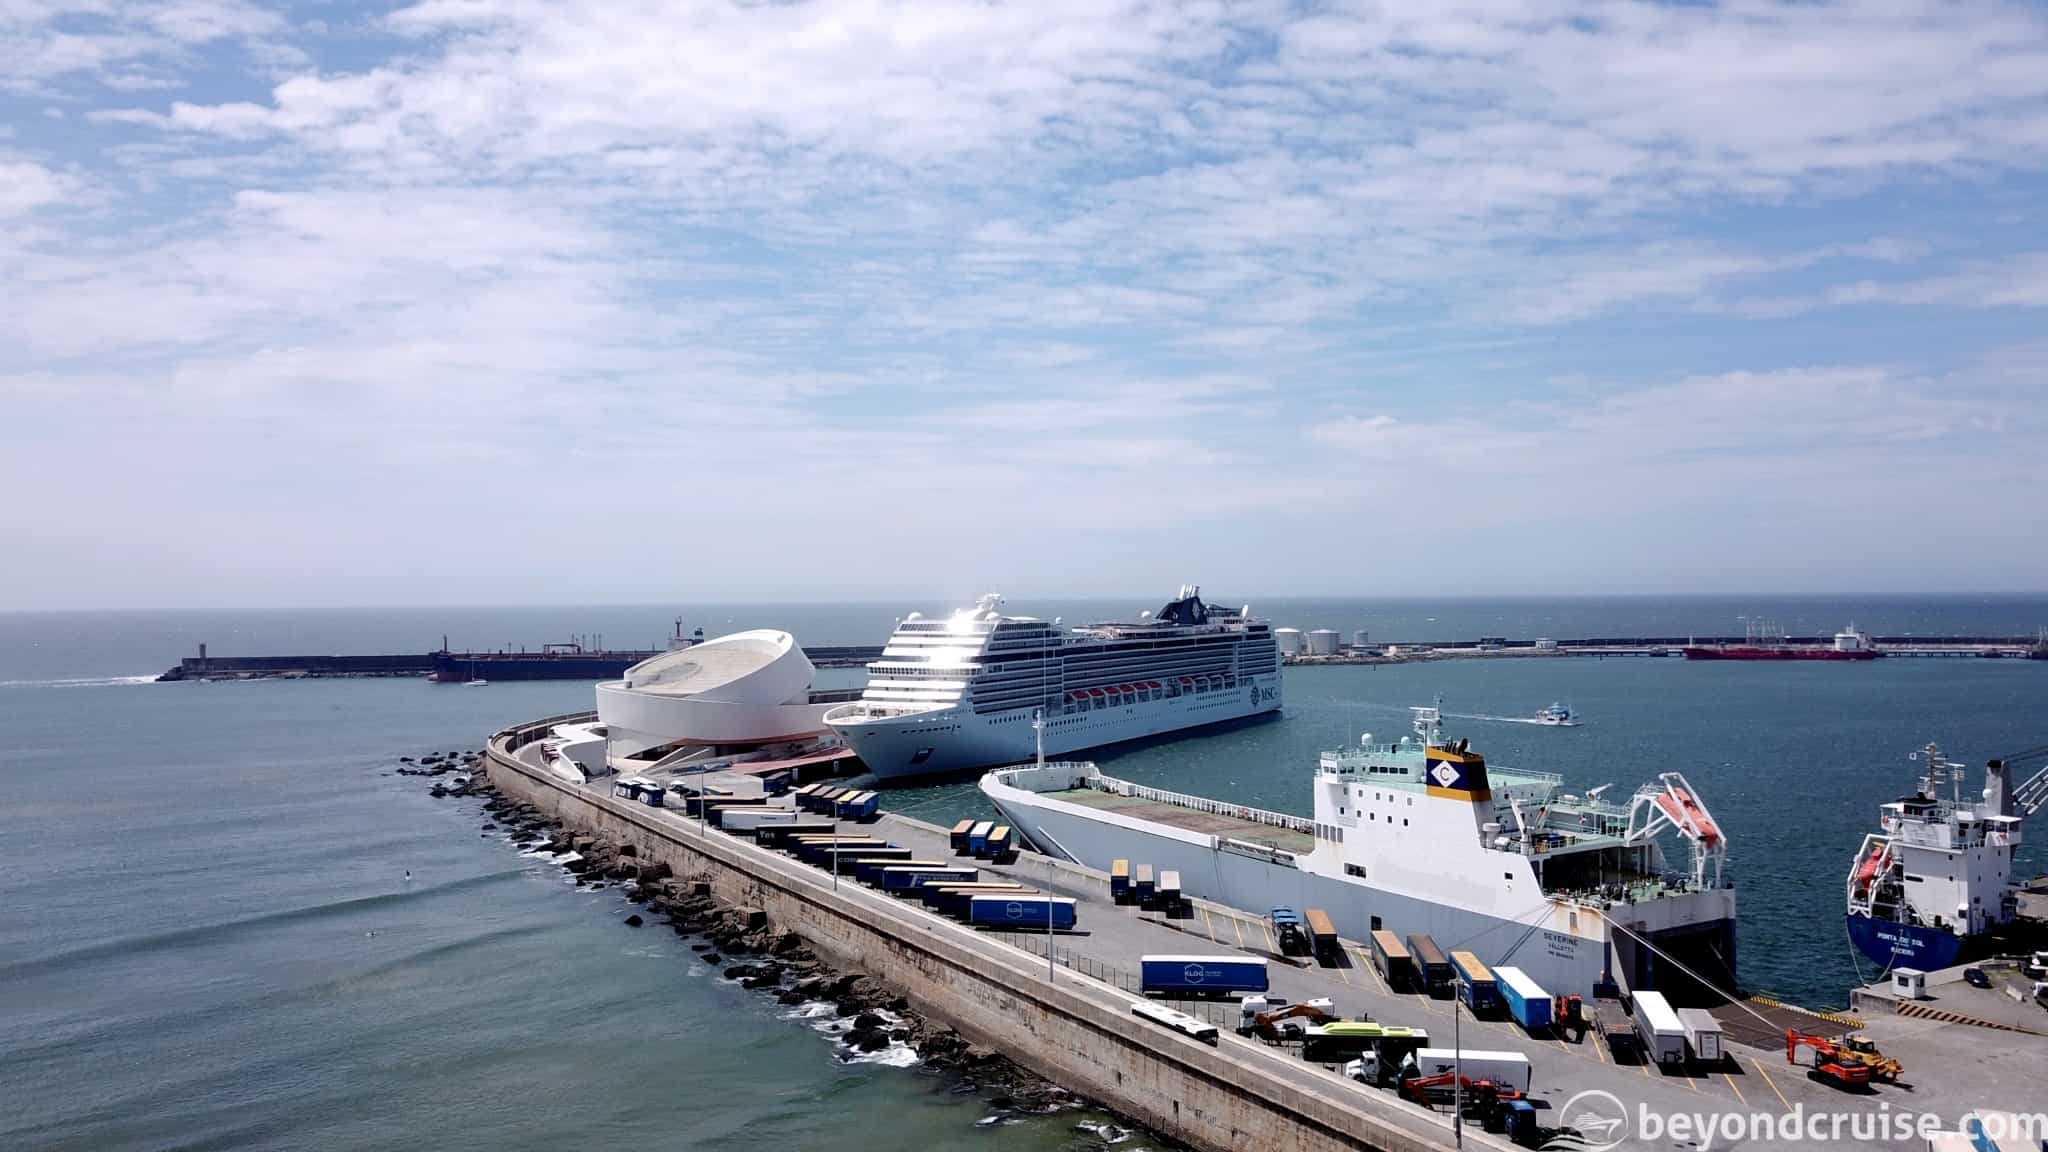 MSC Magnifica in the port of Leixoes